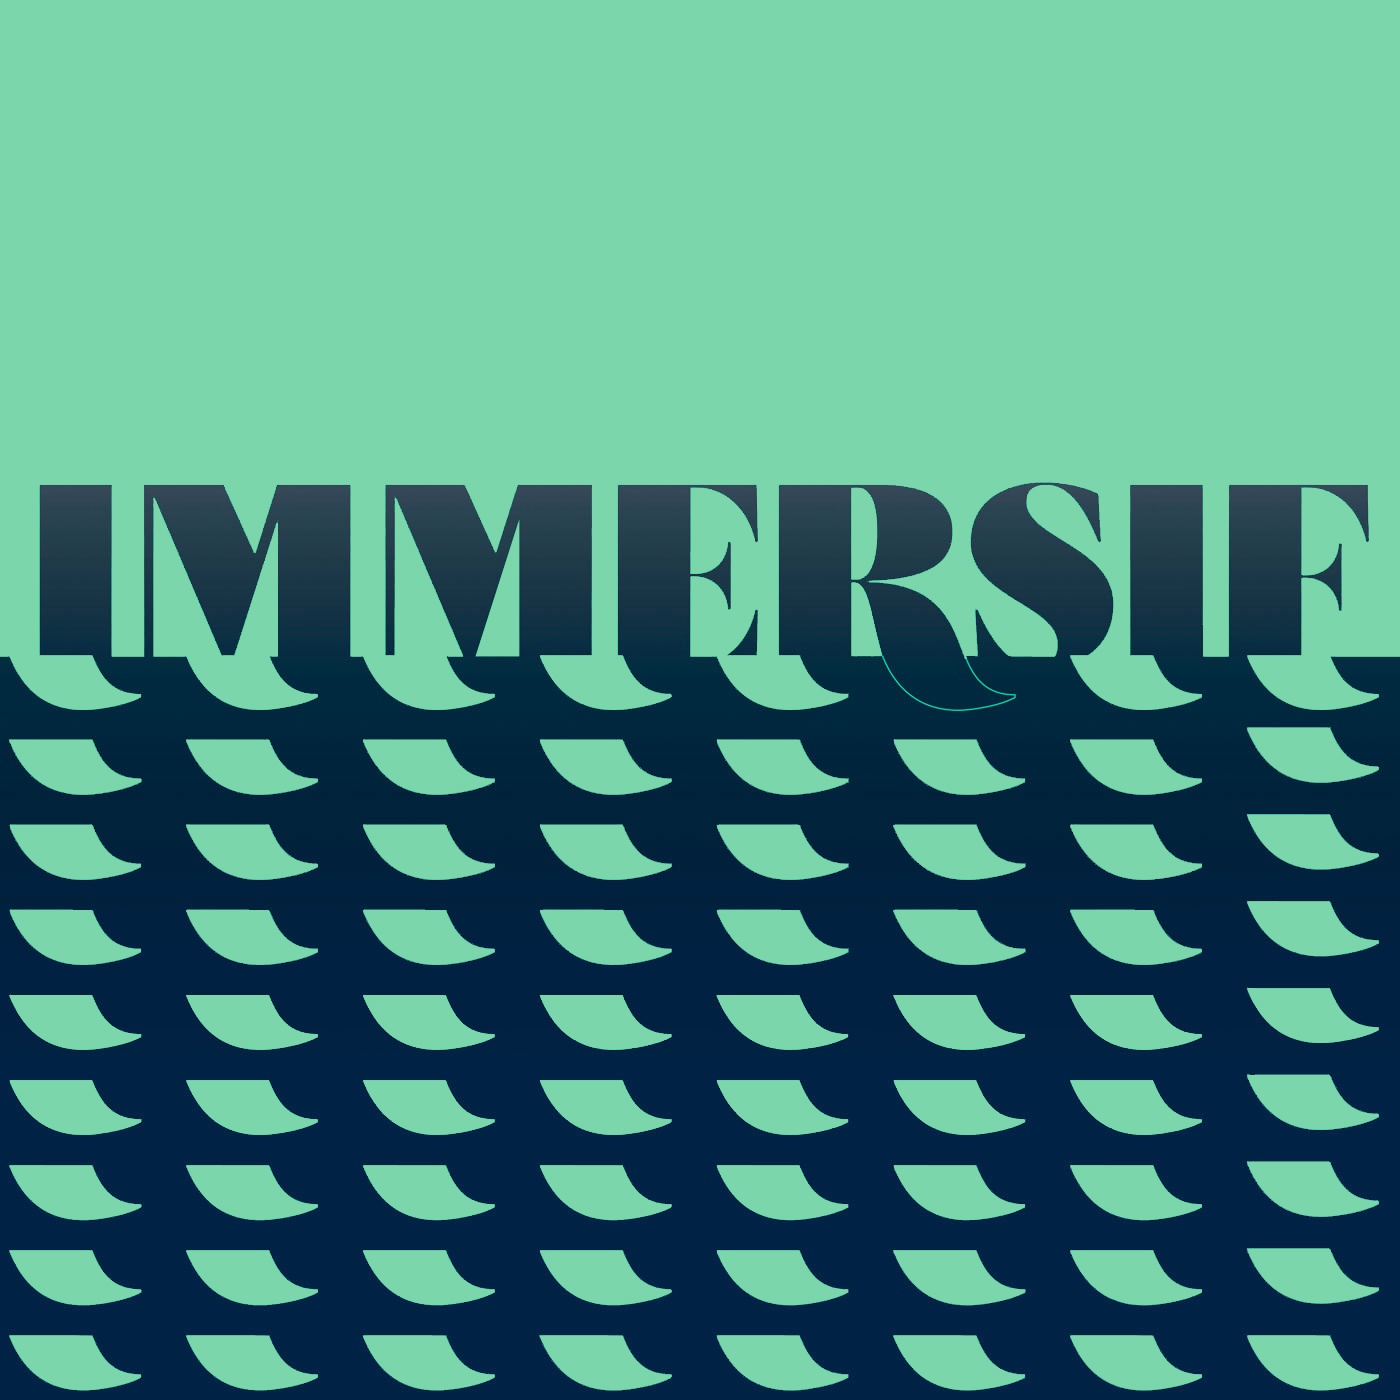 Immersif – Cyber-abysses